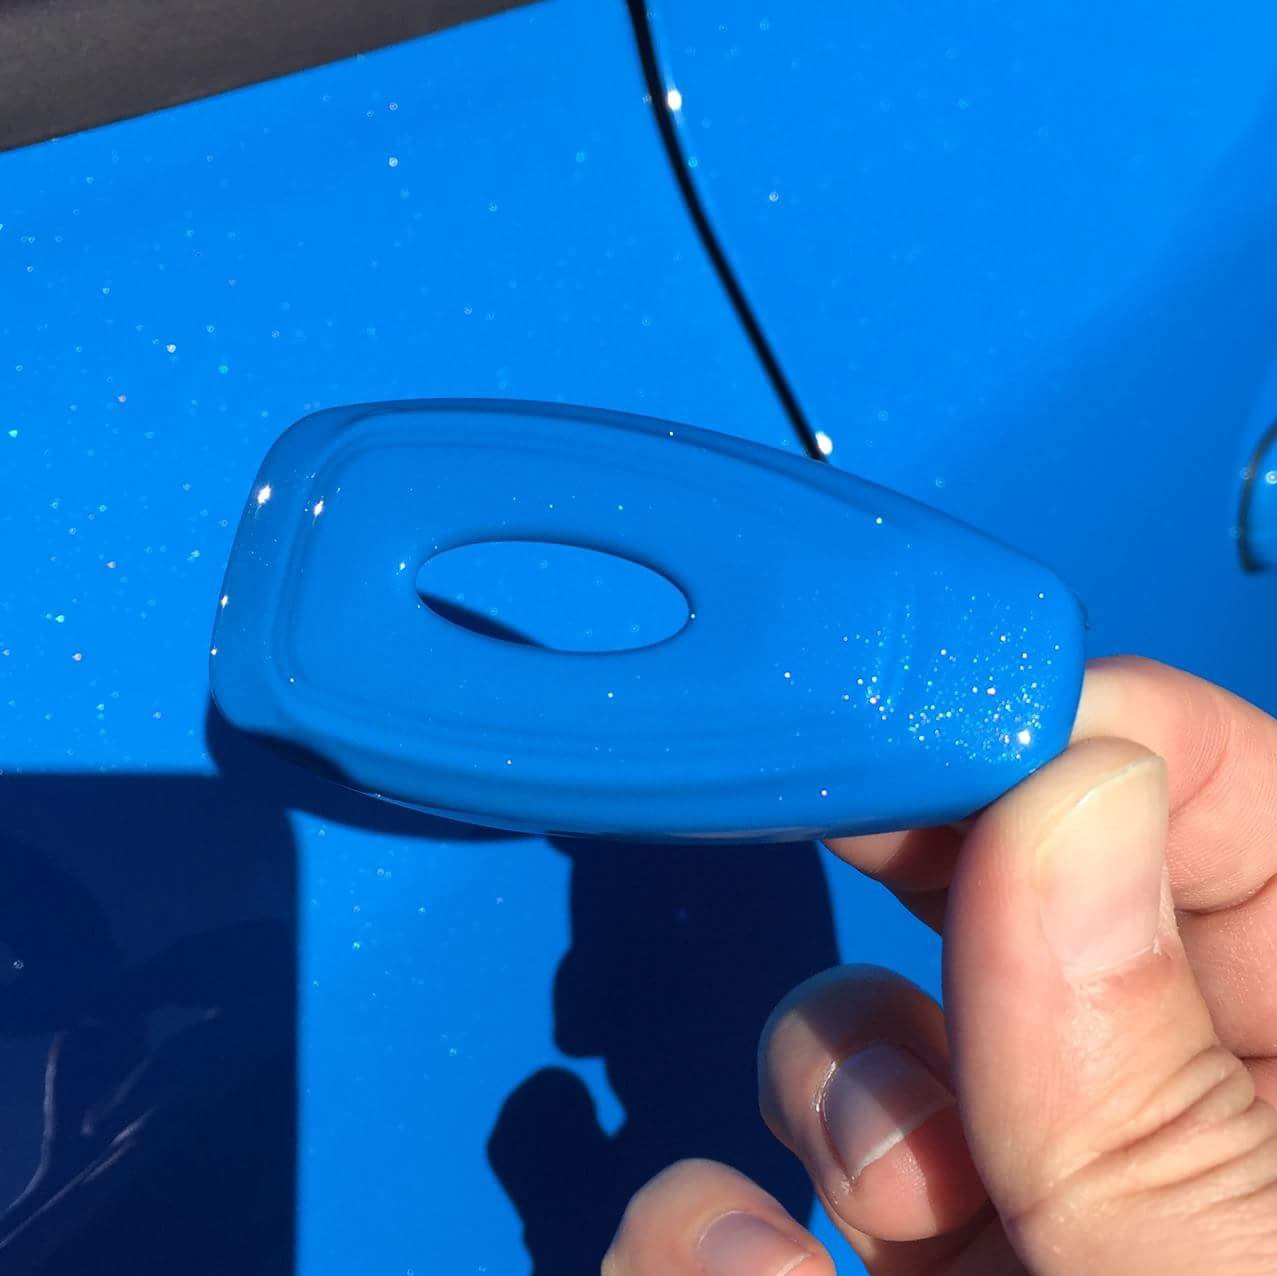 Custom Painted Ford 'Keyless Start' Key Cover next to car